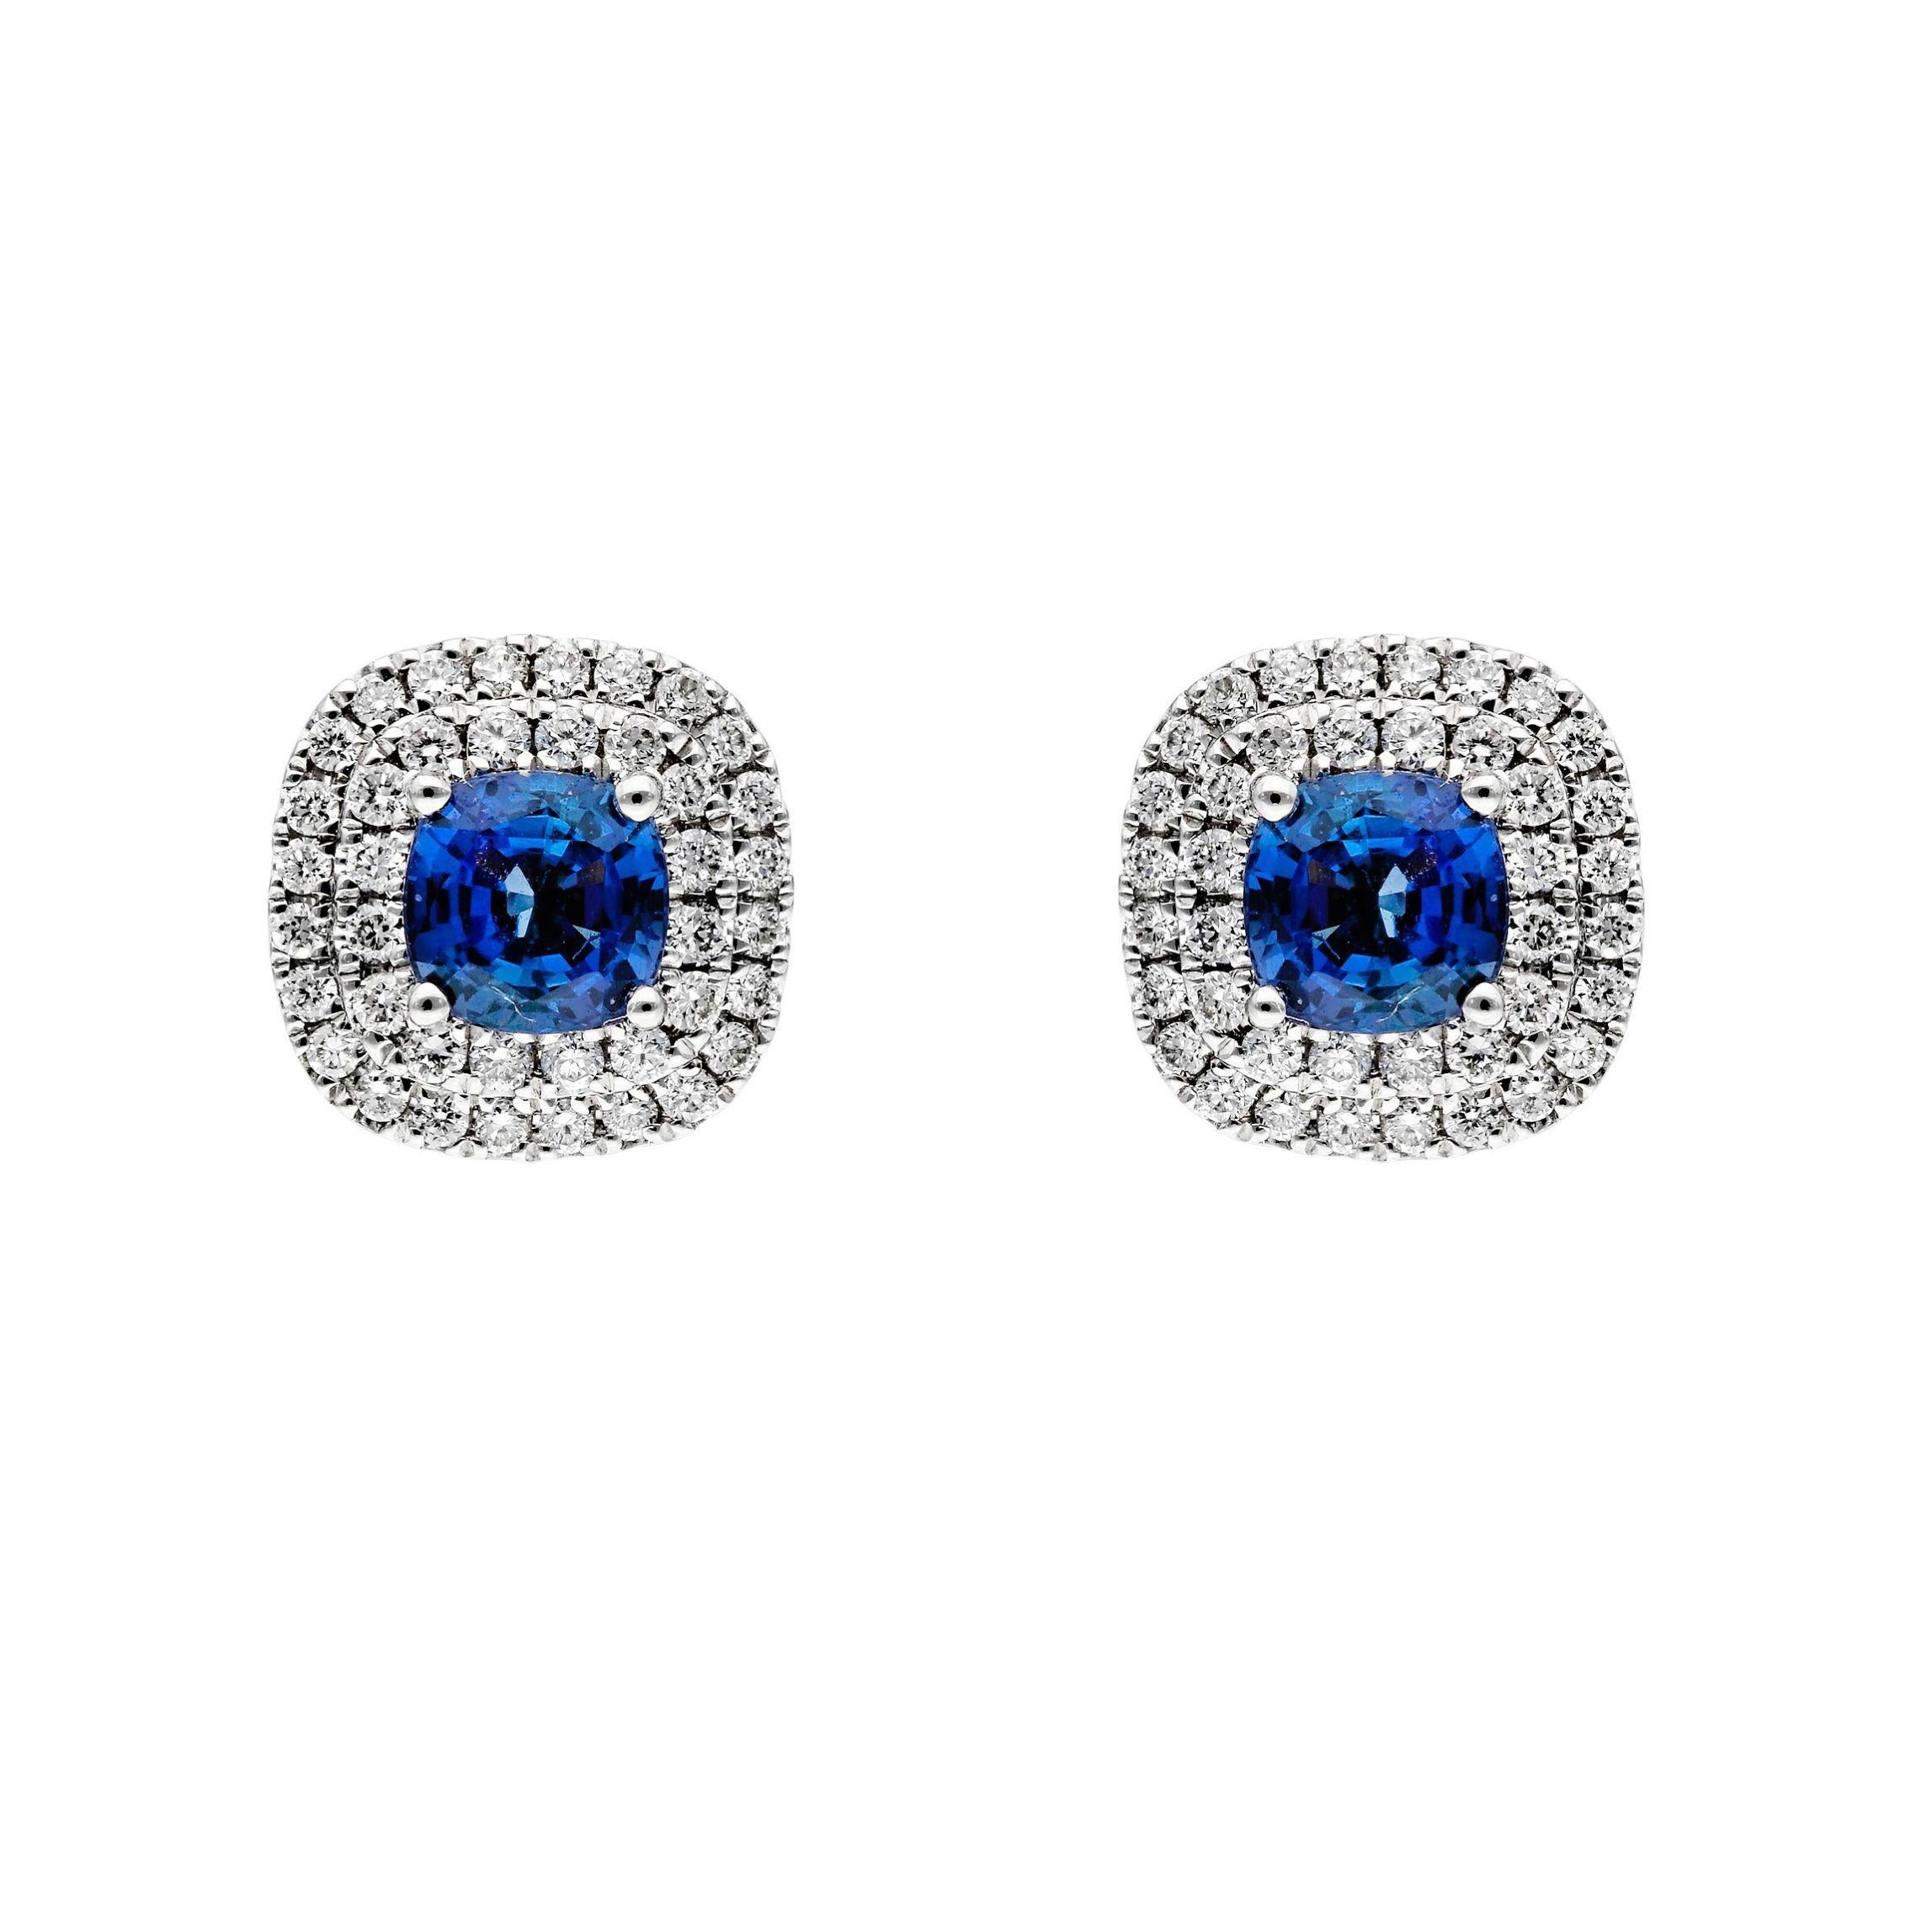 18ct White Gold 0.28ct Diamond & 0.86ct Sapphire Earrings

Introducing our luxurious 18ct White Gold Diamond & Sapphire Earrings, a symphony of elegance and sophistication. Each earring is graced with a stunning cushion-cut sapphire, celebrated for